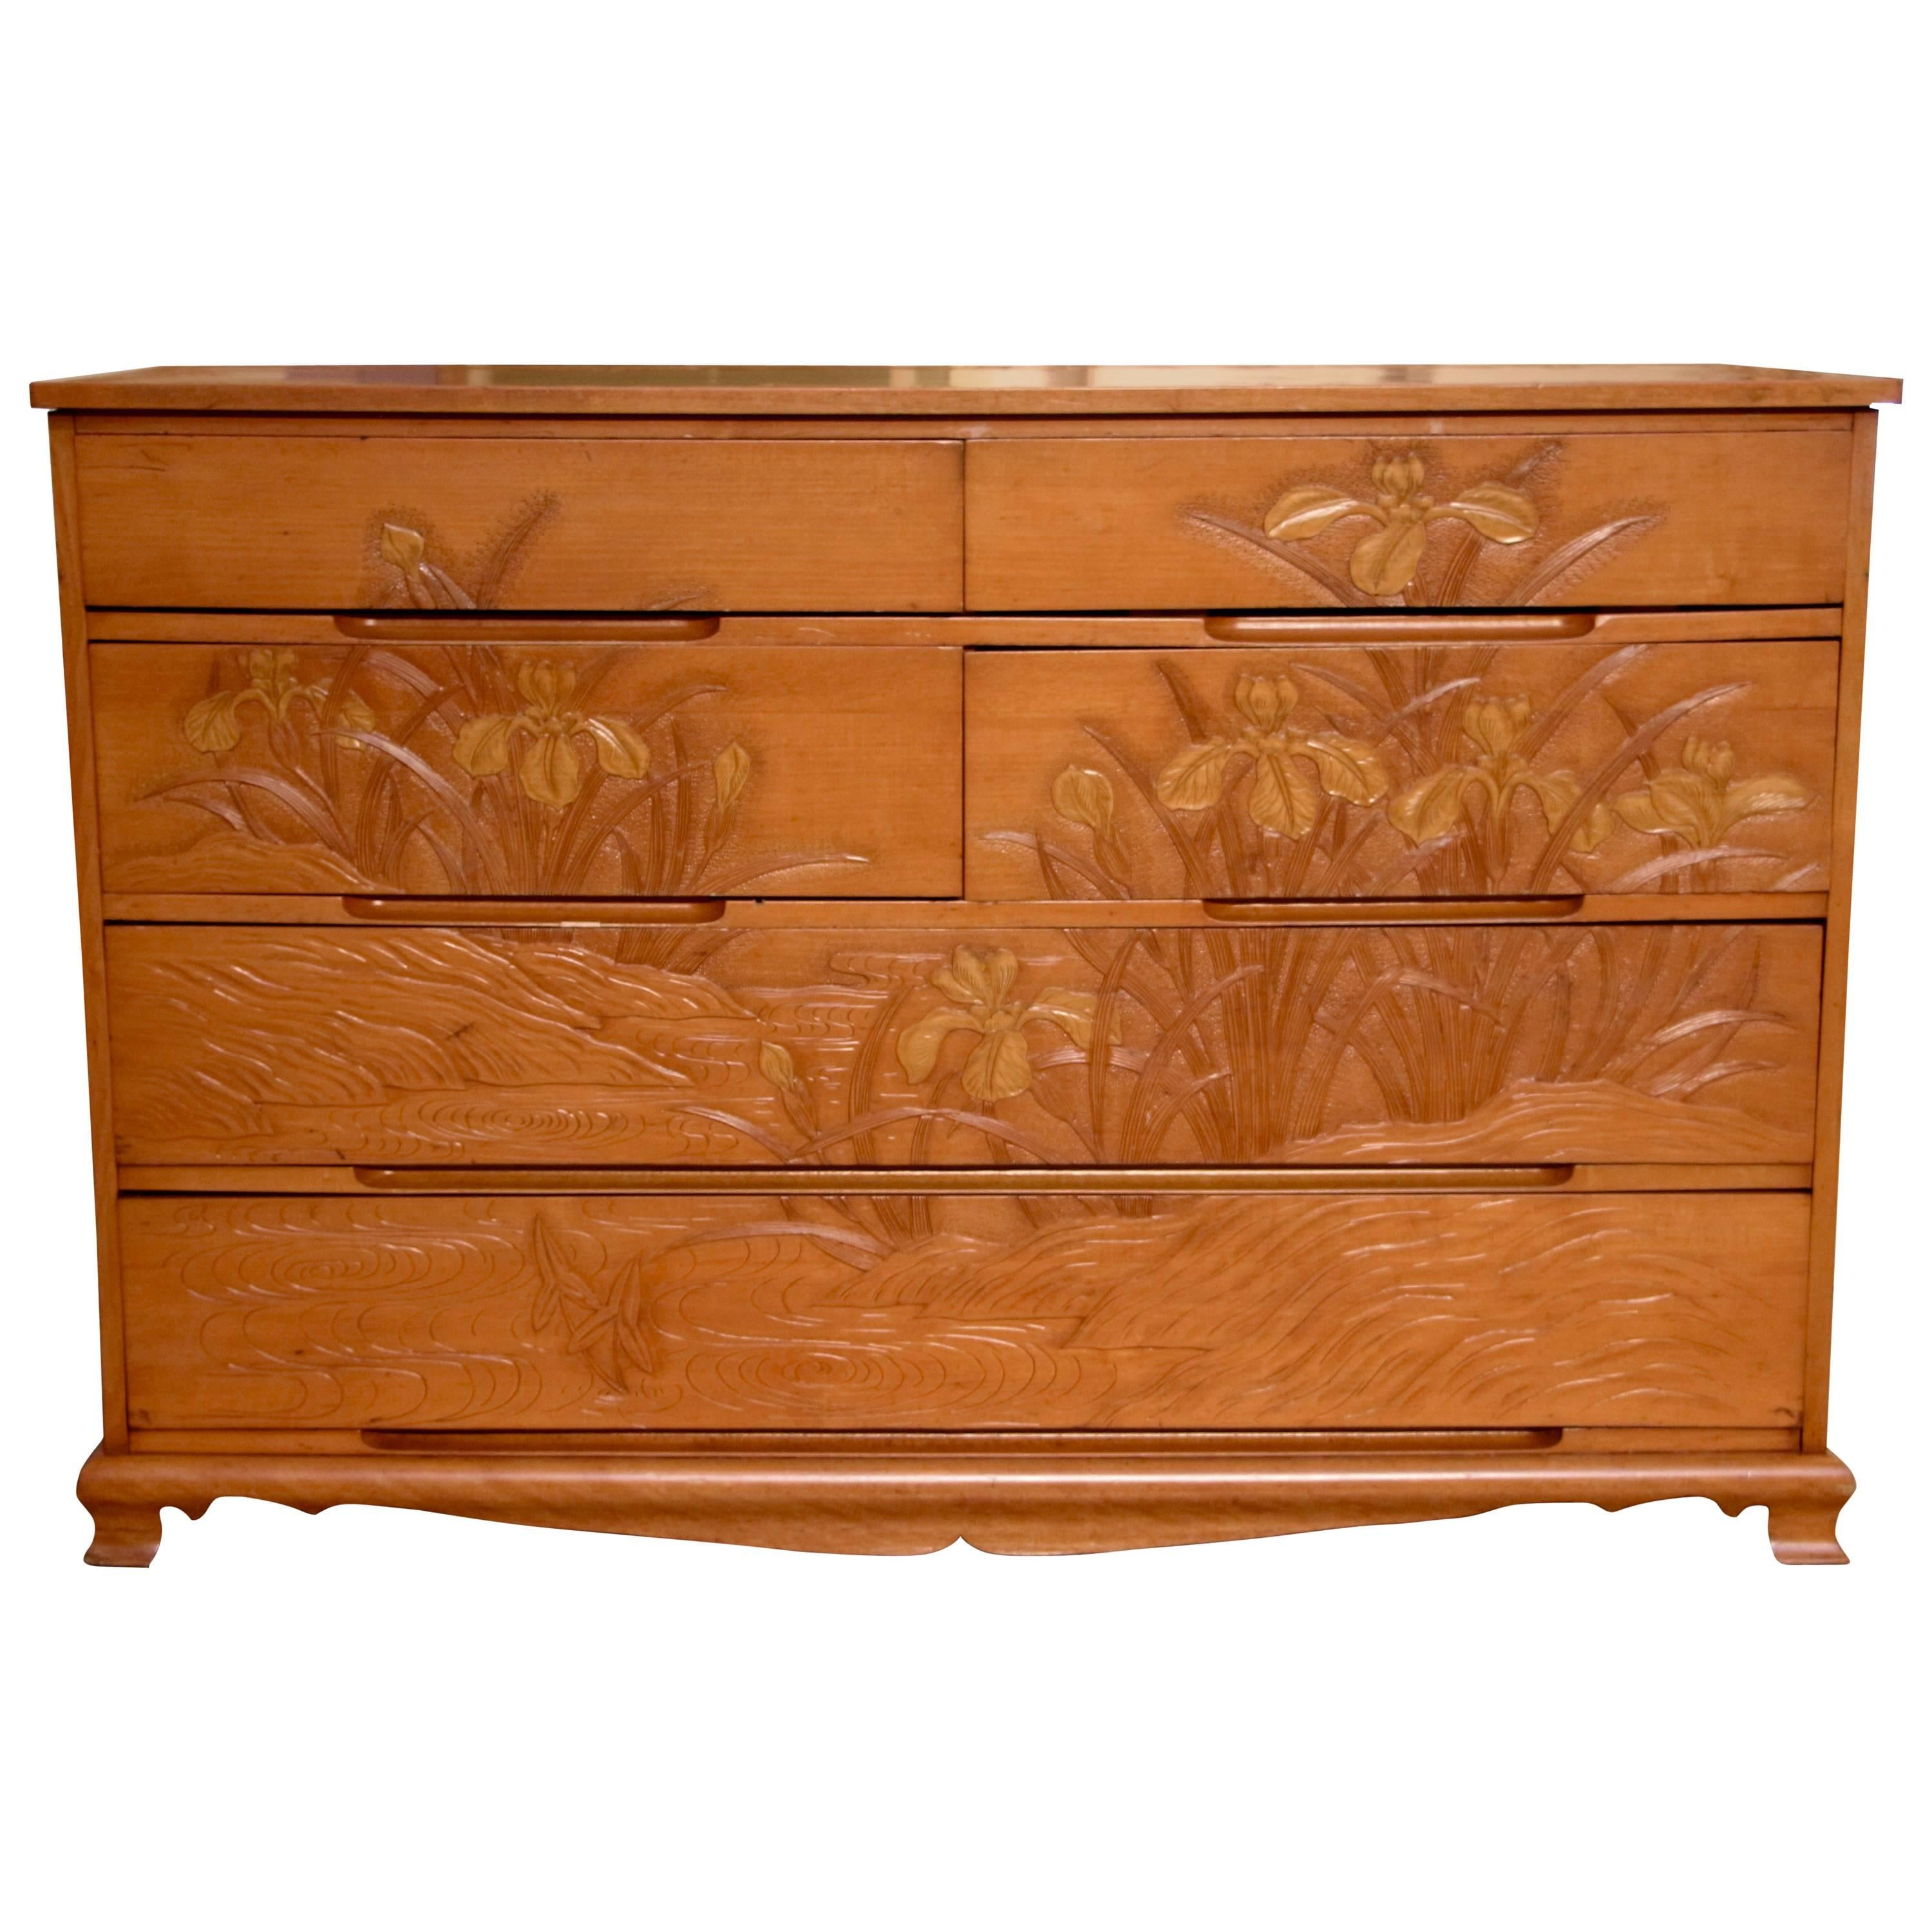 Most Unusual Carved Maple Japanese Chest with Floral Motif